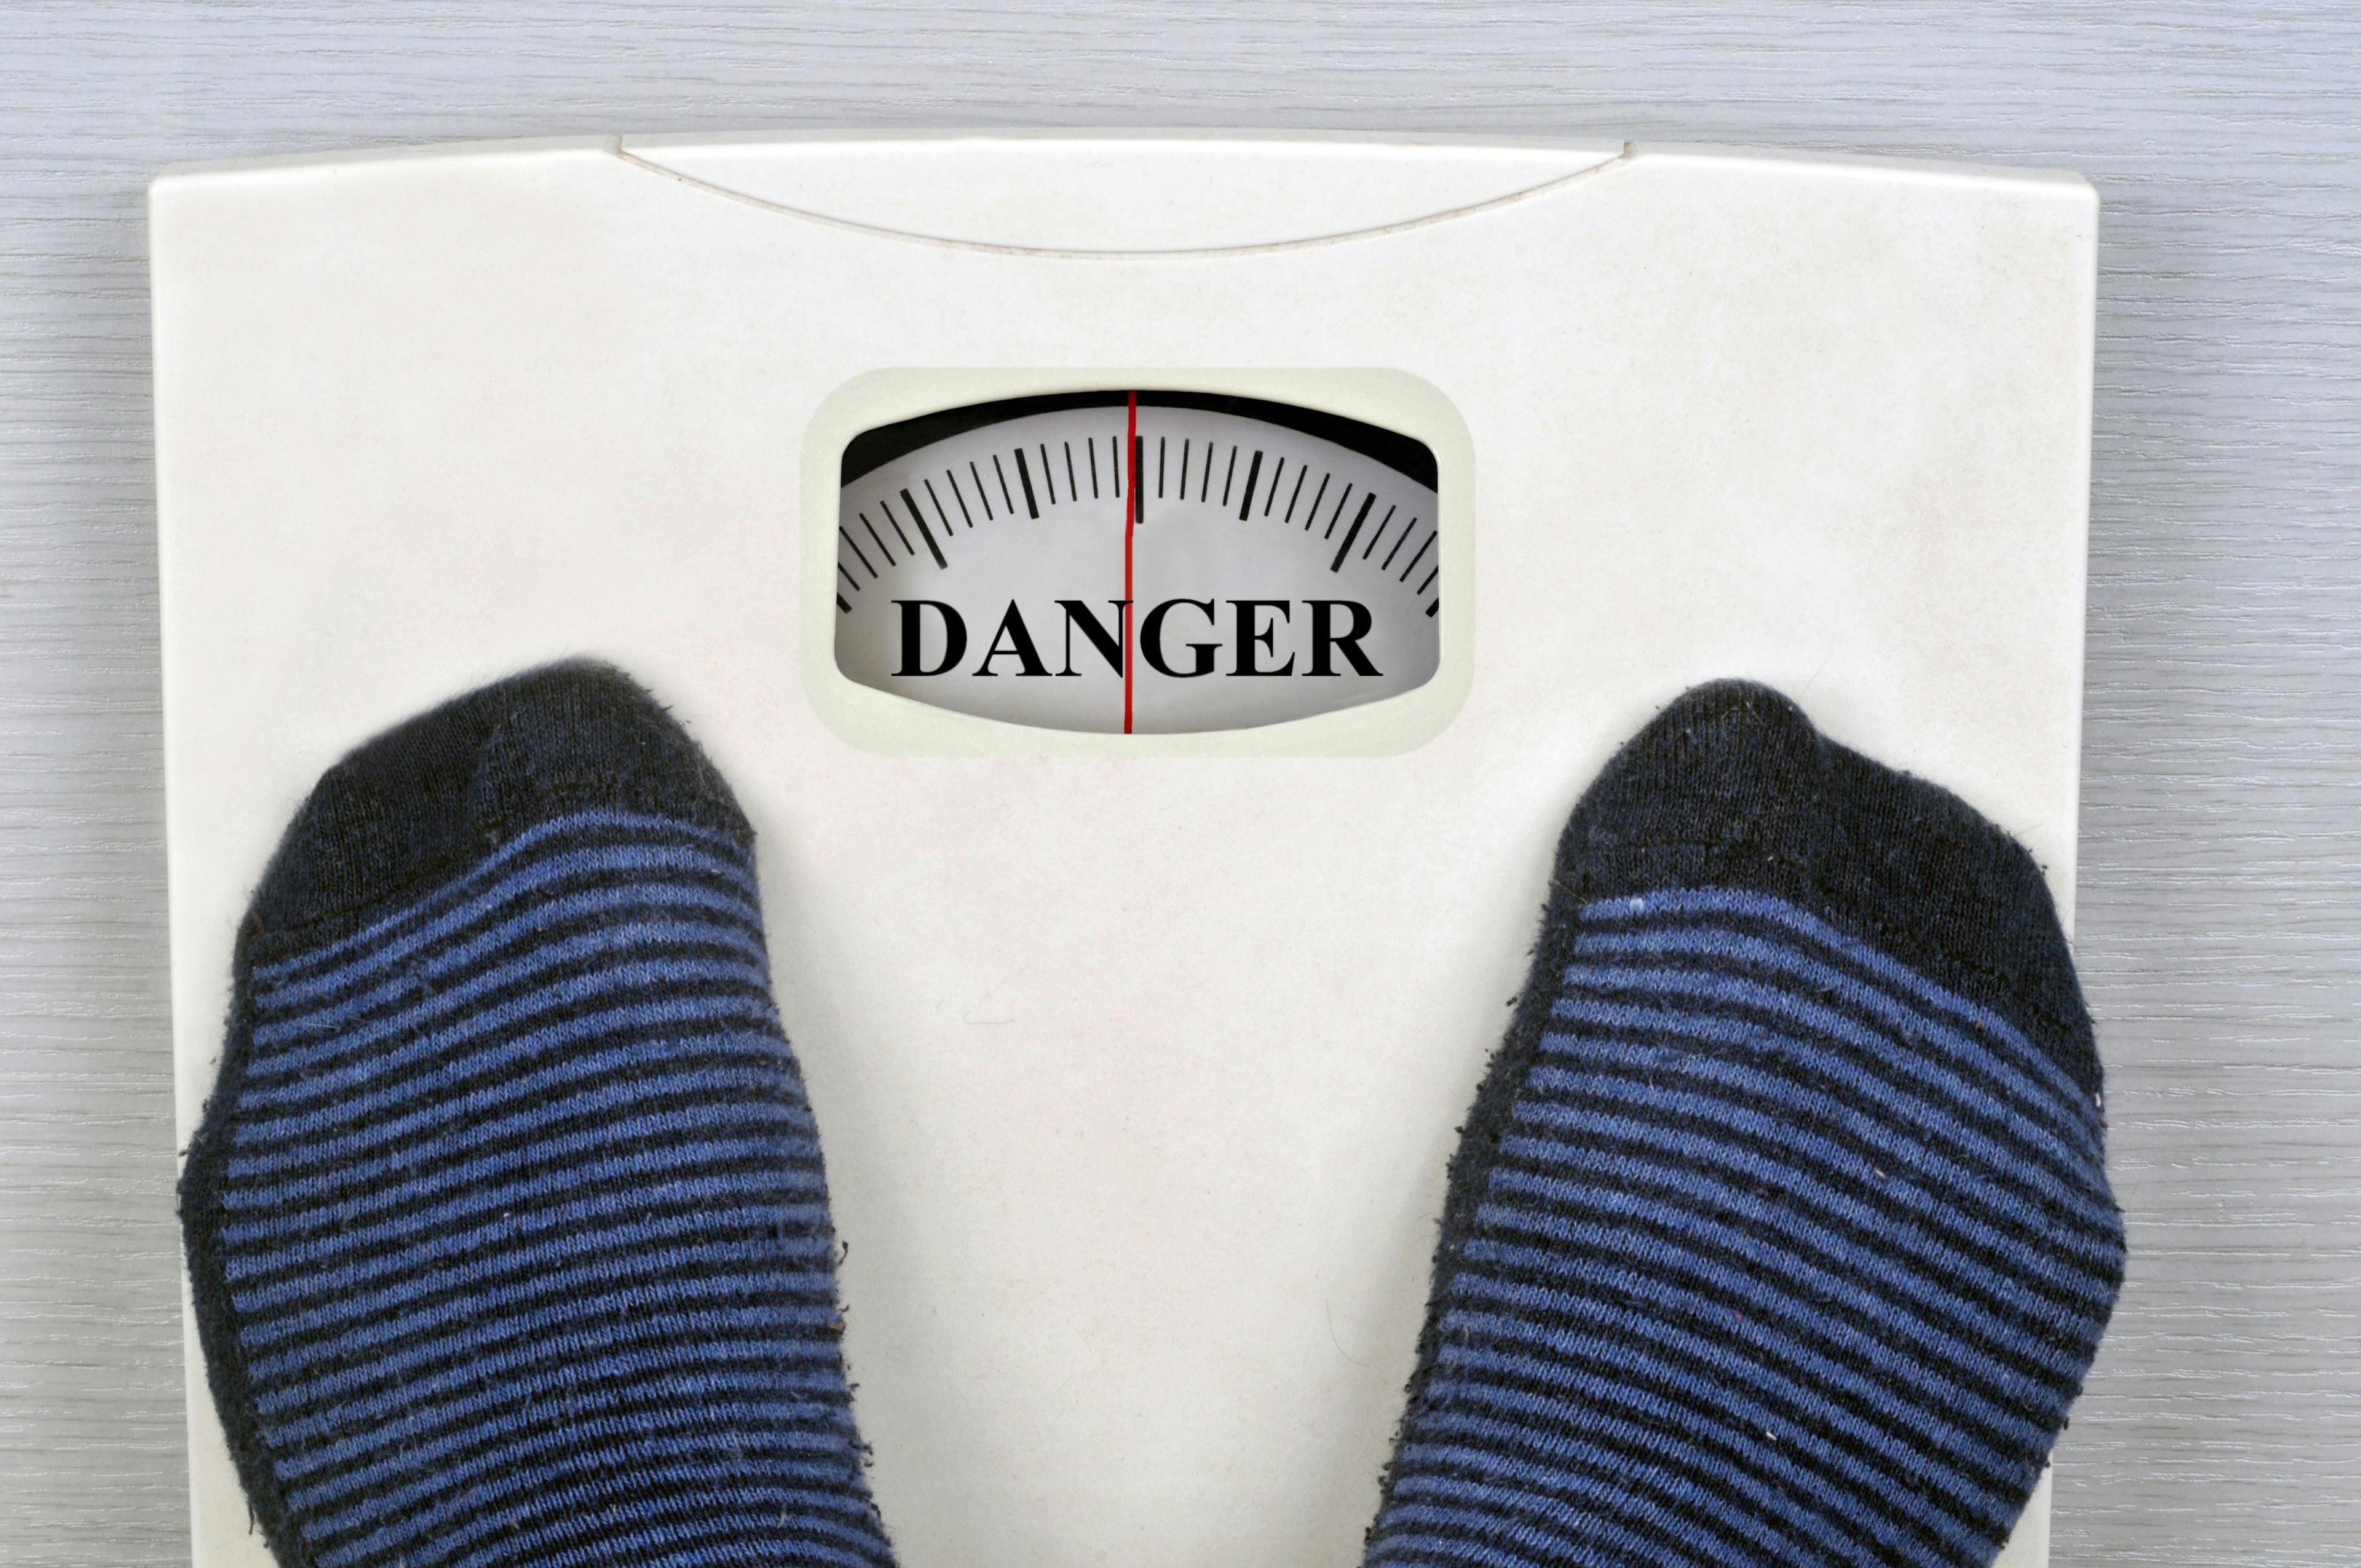 Overweight, Obesity in Midlife Tied to Higher Morbidity and Health Care Costs Later in Life